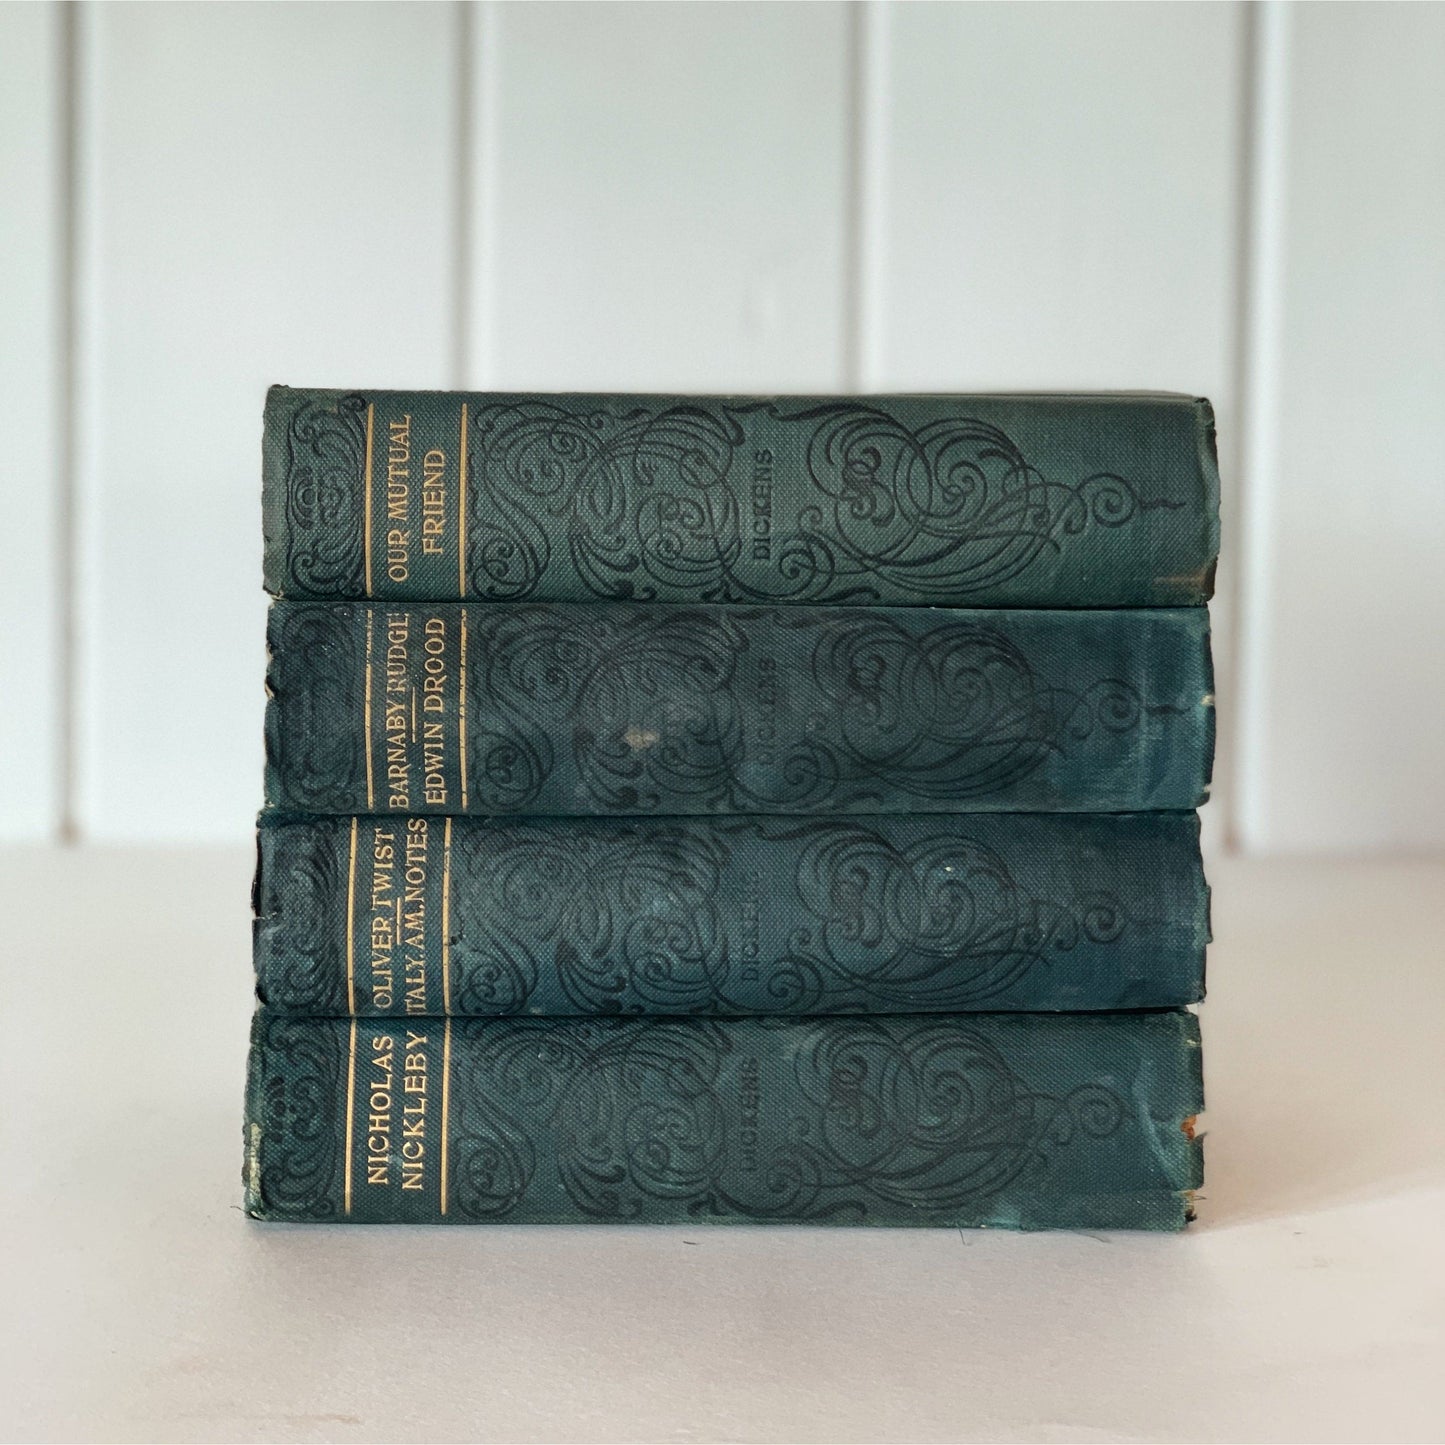 Shabby Antique Green Charles Dickens Books for Display